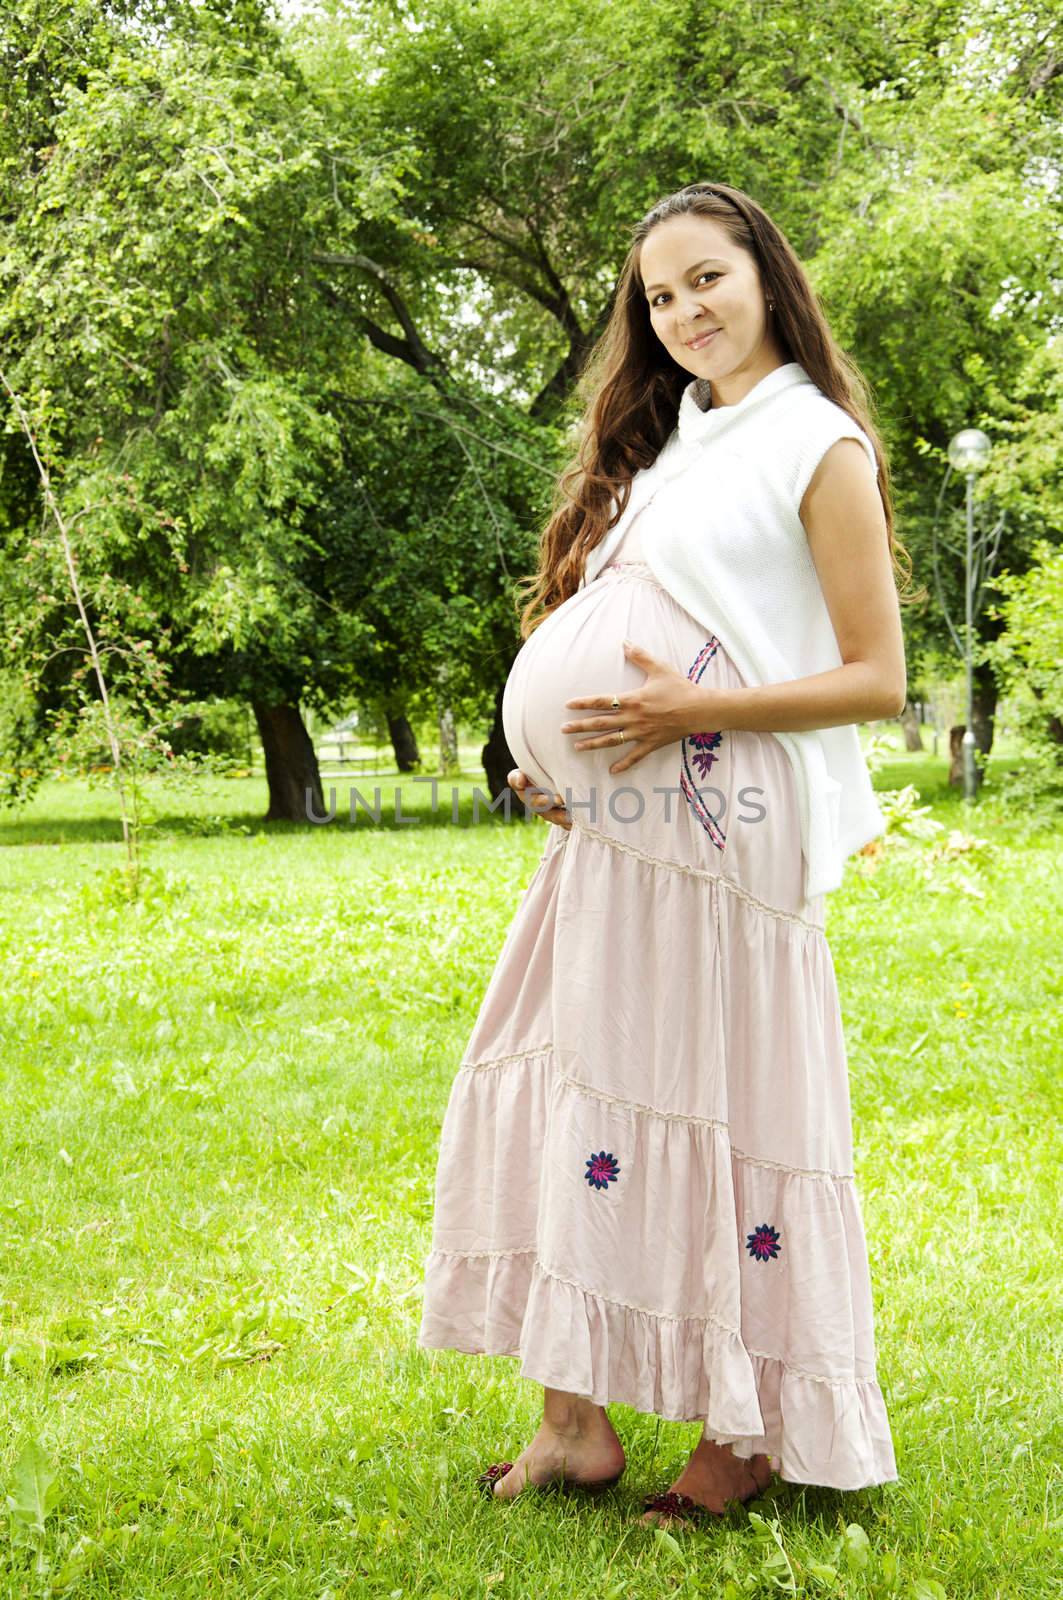 Pregnant Young Woman smile in summer park